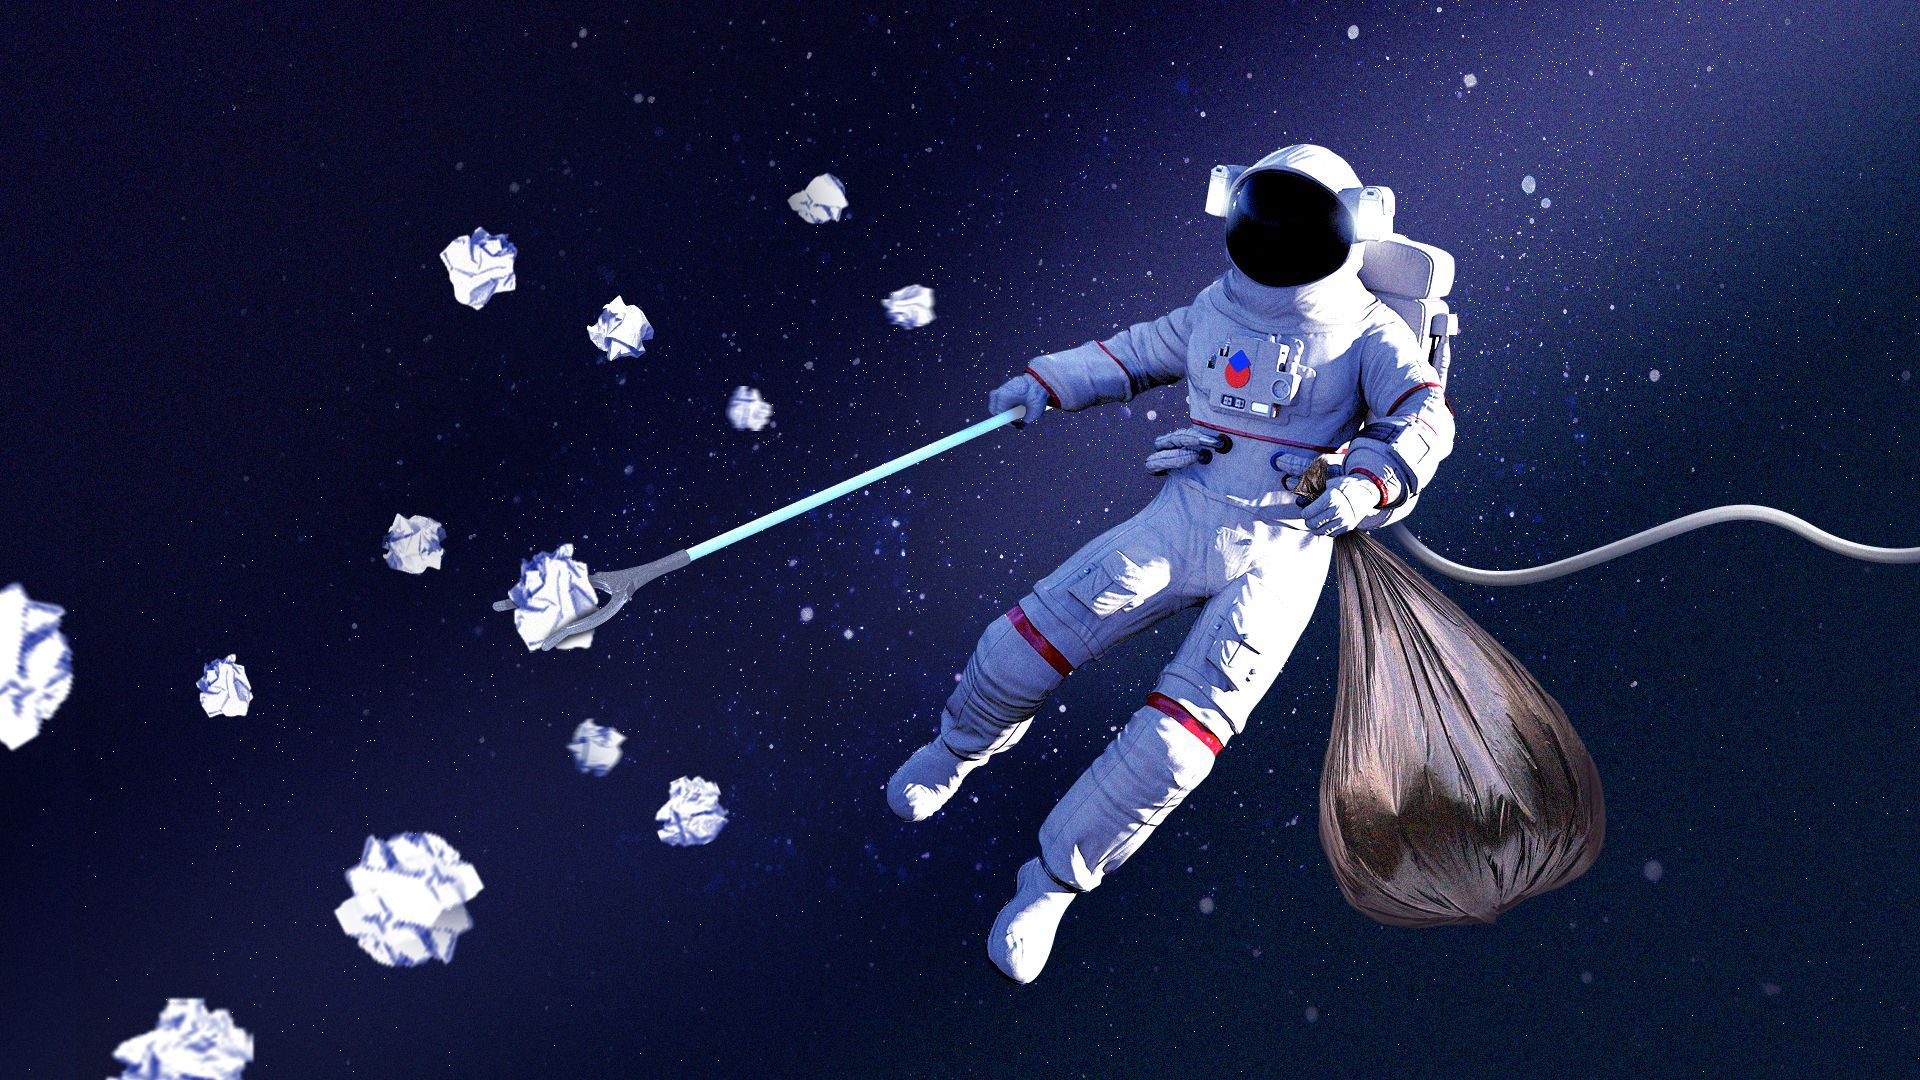 Illustration of an astronaut floating in outer space while collecting trash and holding a garbage bag.